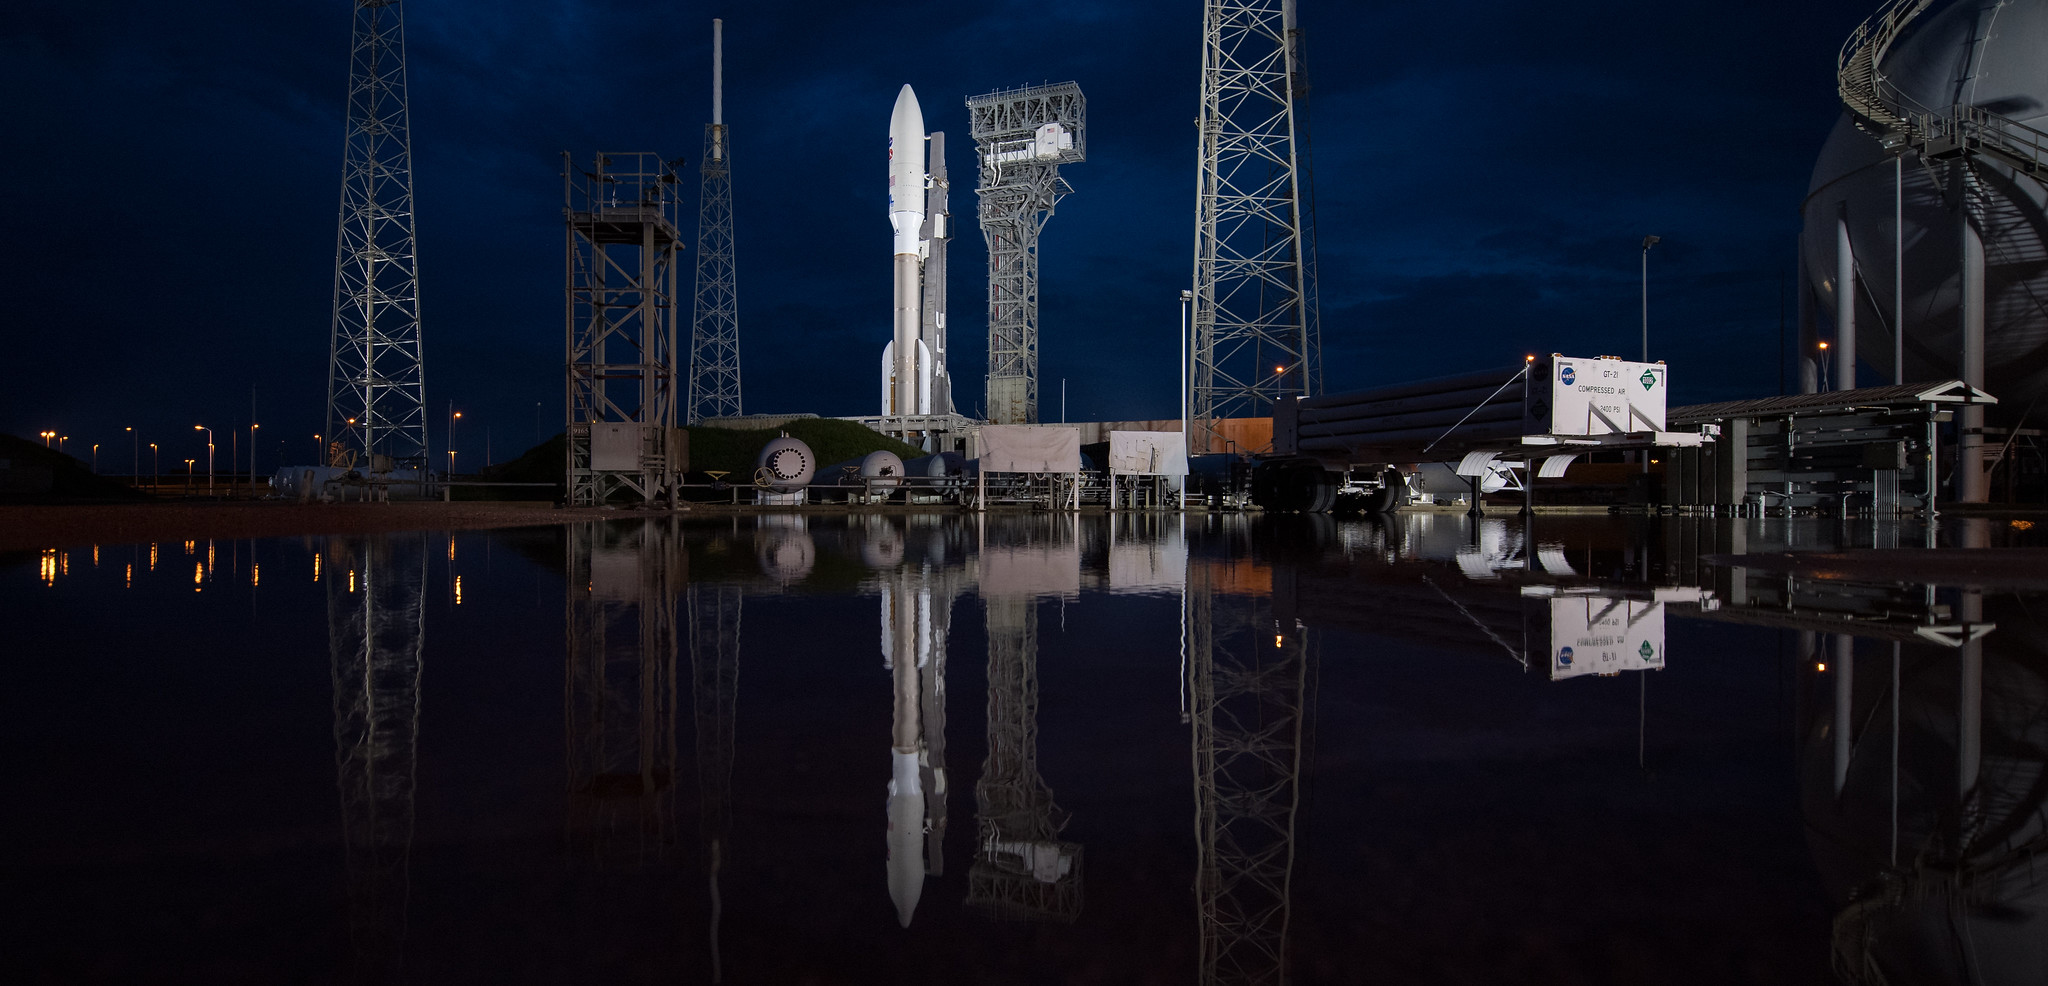 Perseverance is ready to launch. The rover is strapped in aboard a United Launch Alliance Atlas V rocket which can be seen here on Tuesday, July 28, 2020 on the launch pad at Space Launch Complex 41 at Cape Canaveral Air Force Station in Florida.